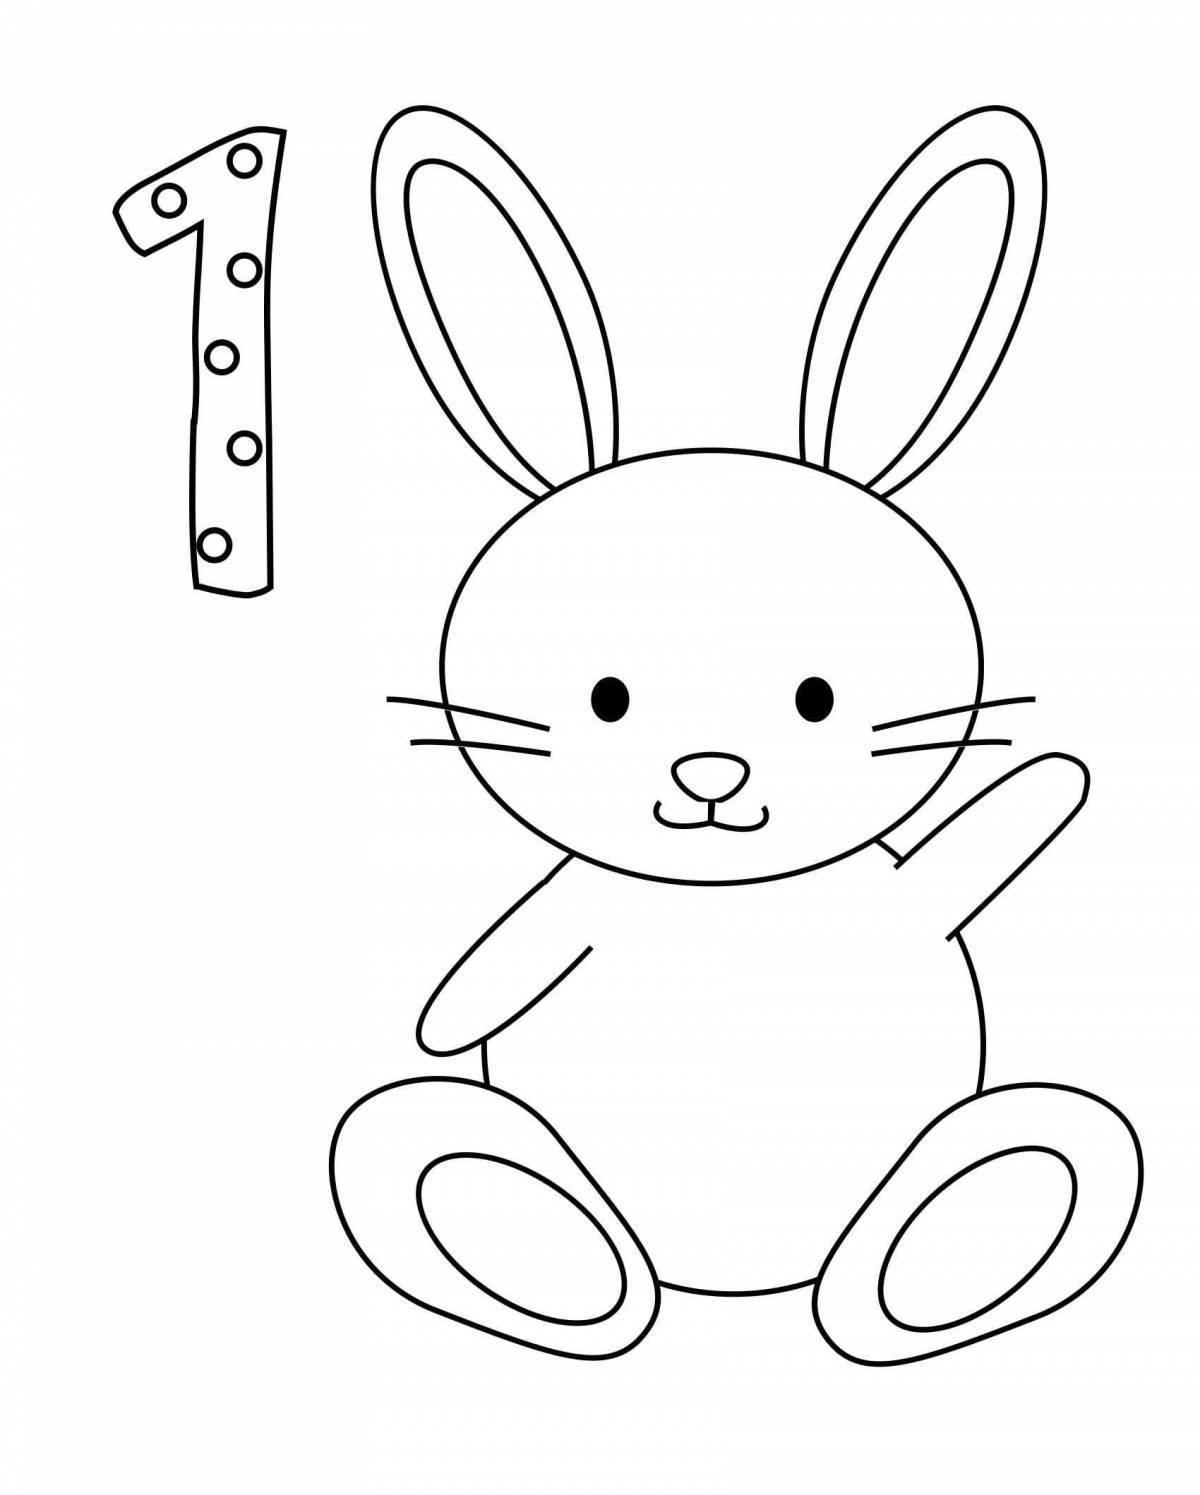 A funny coloring book with a picture of a rabbit